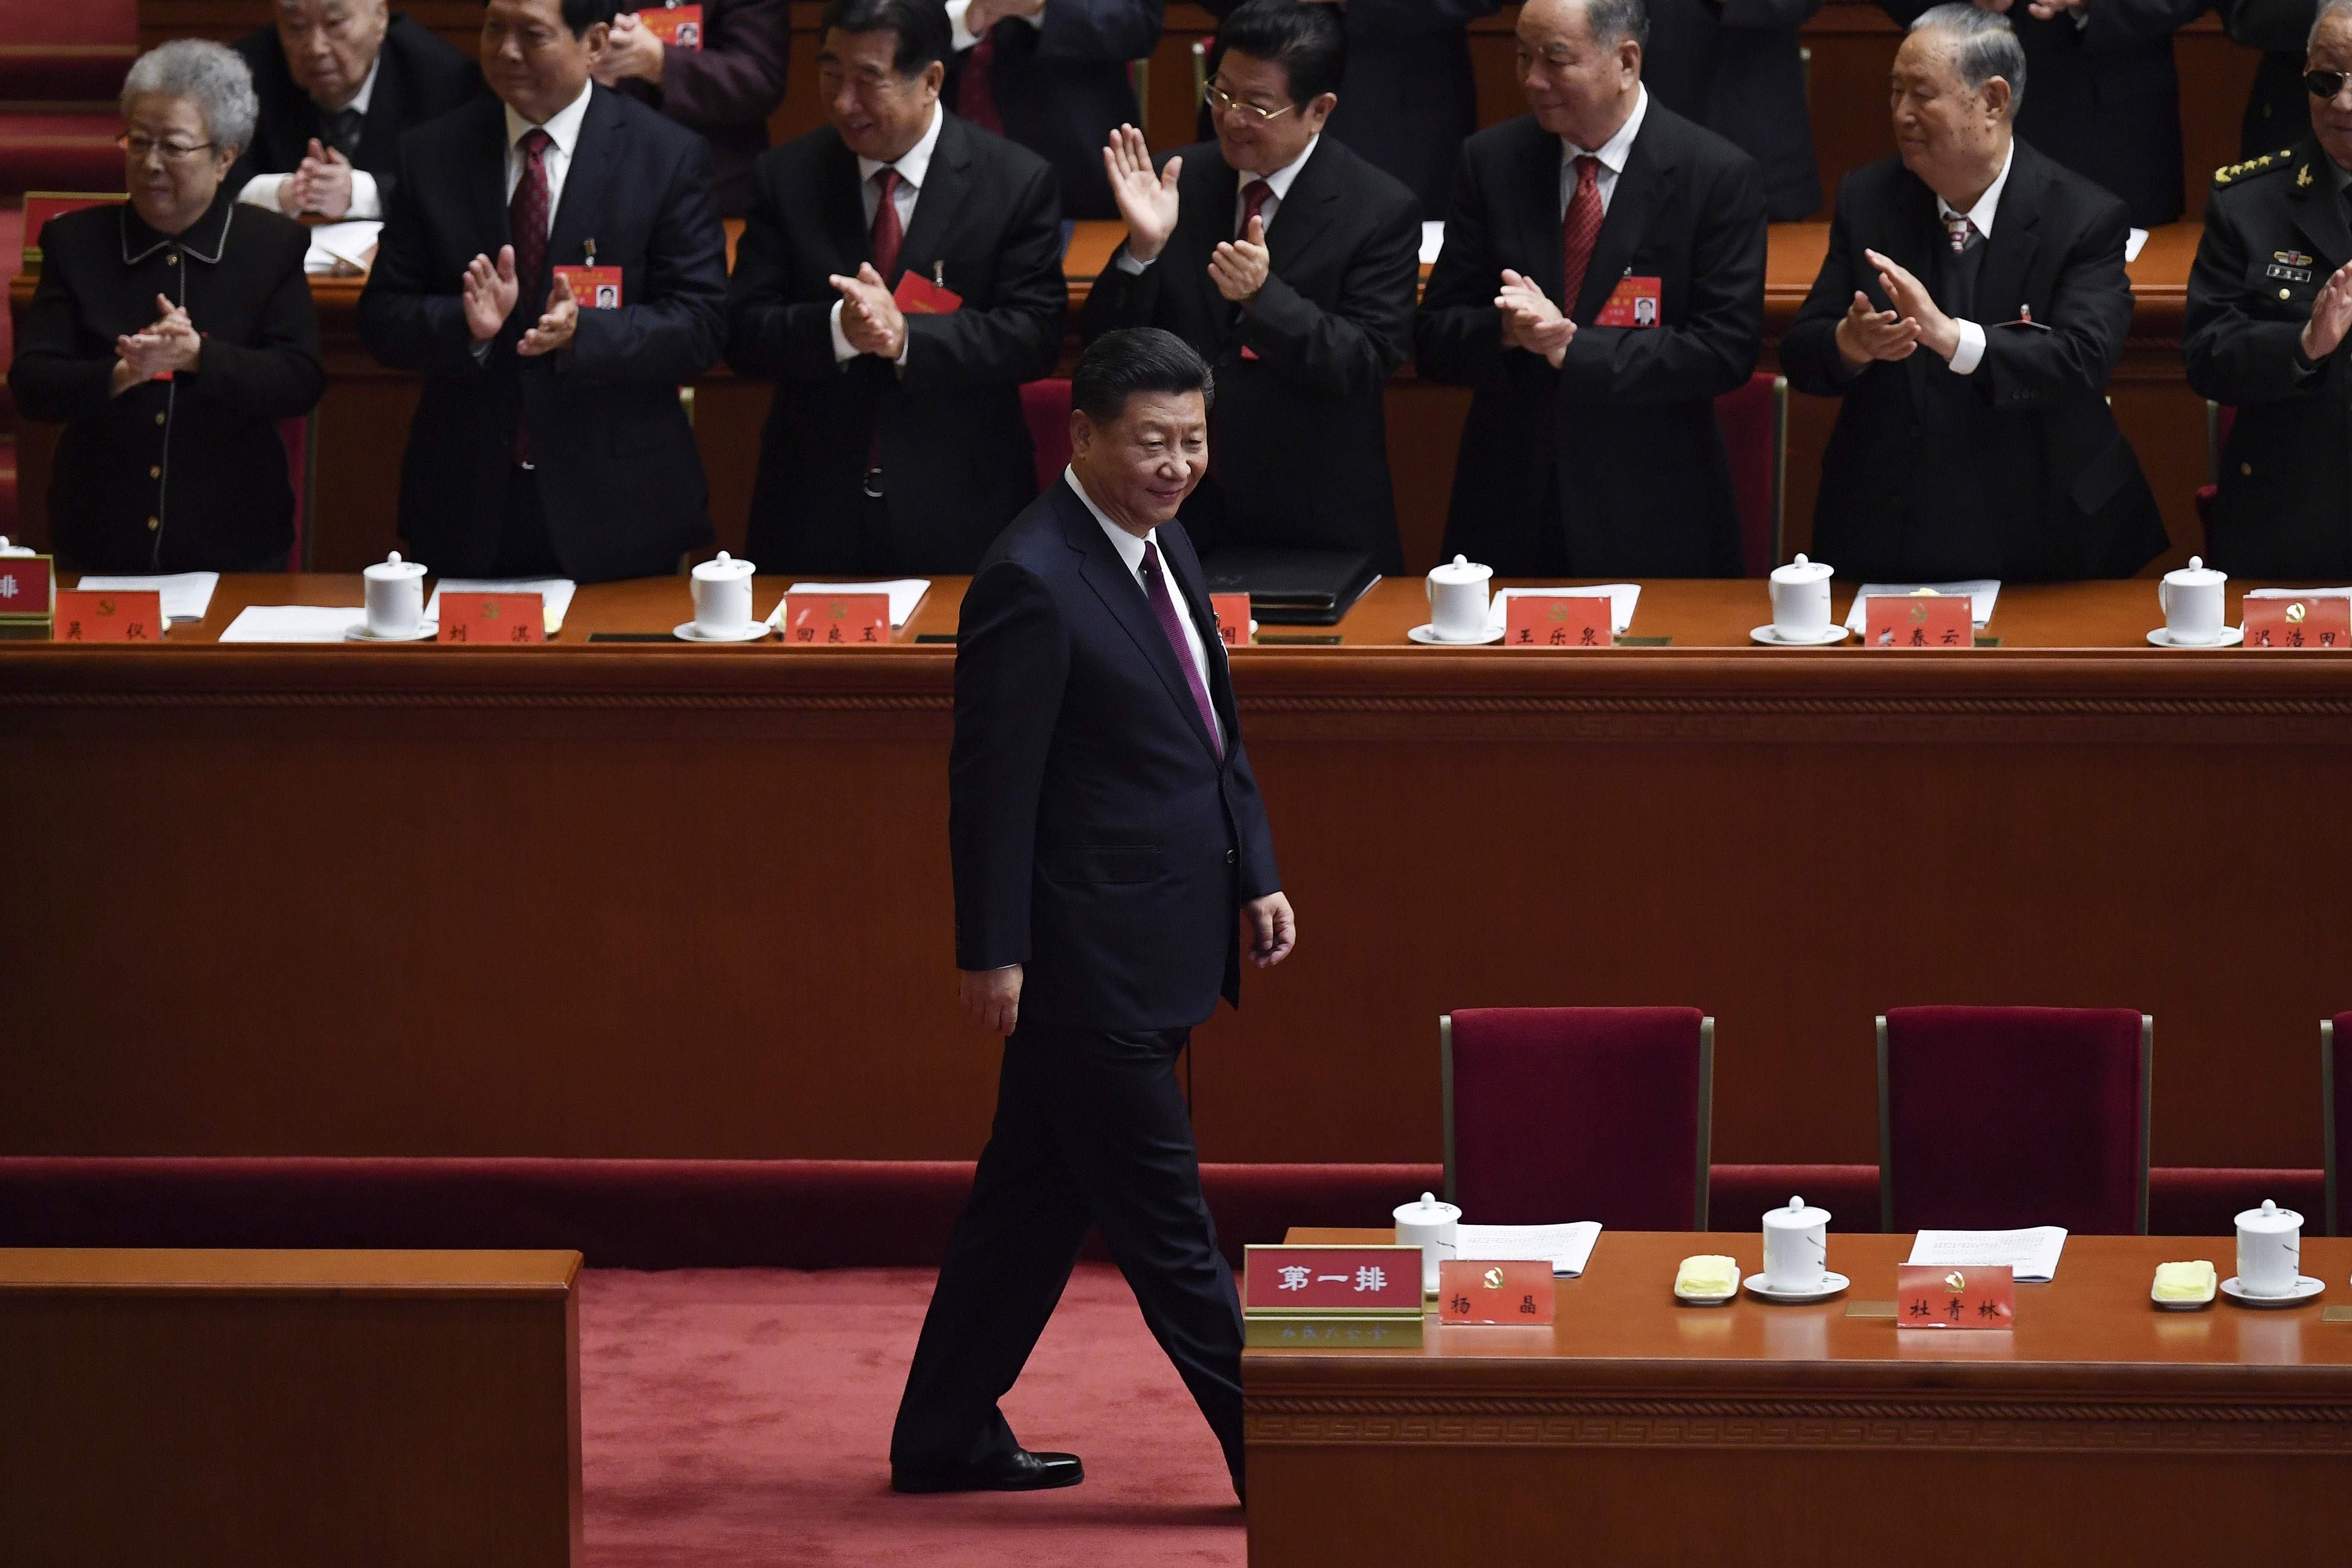 President Xi Jinping attends the opening session of the 19th Communist Party congress at the Great Hall of the People in Beijing. Photo: Agence France-Presse